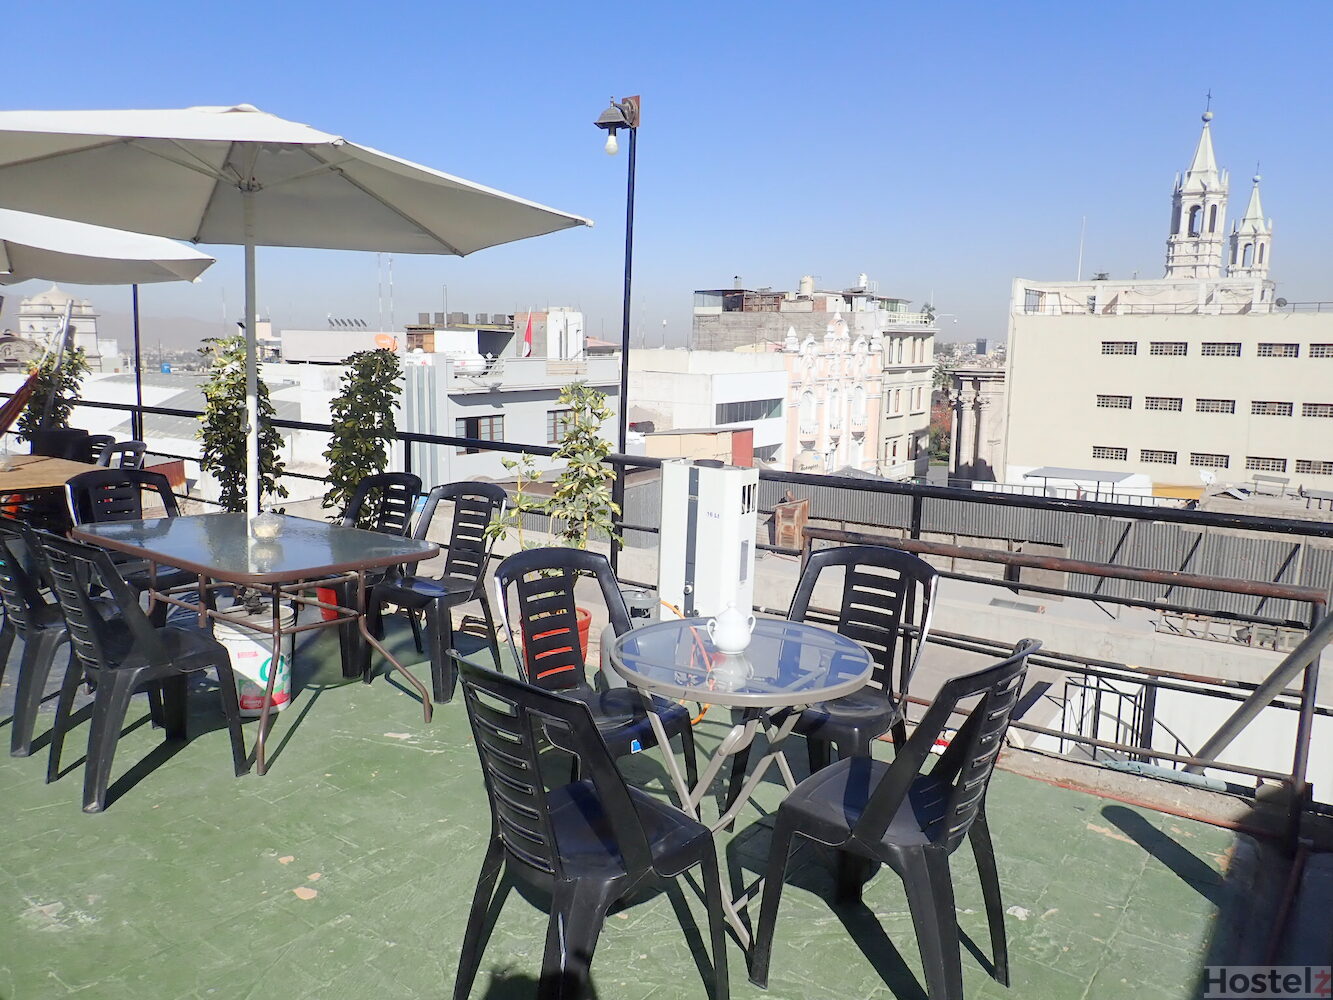 Rooftop bar/ breakfast area,with view of the cathedral towers